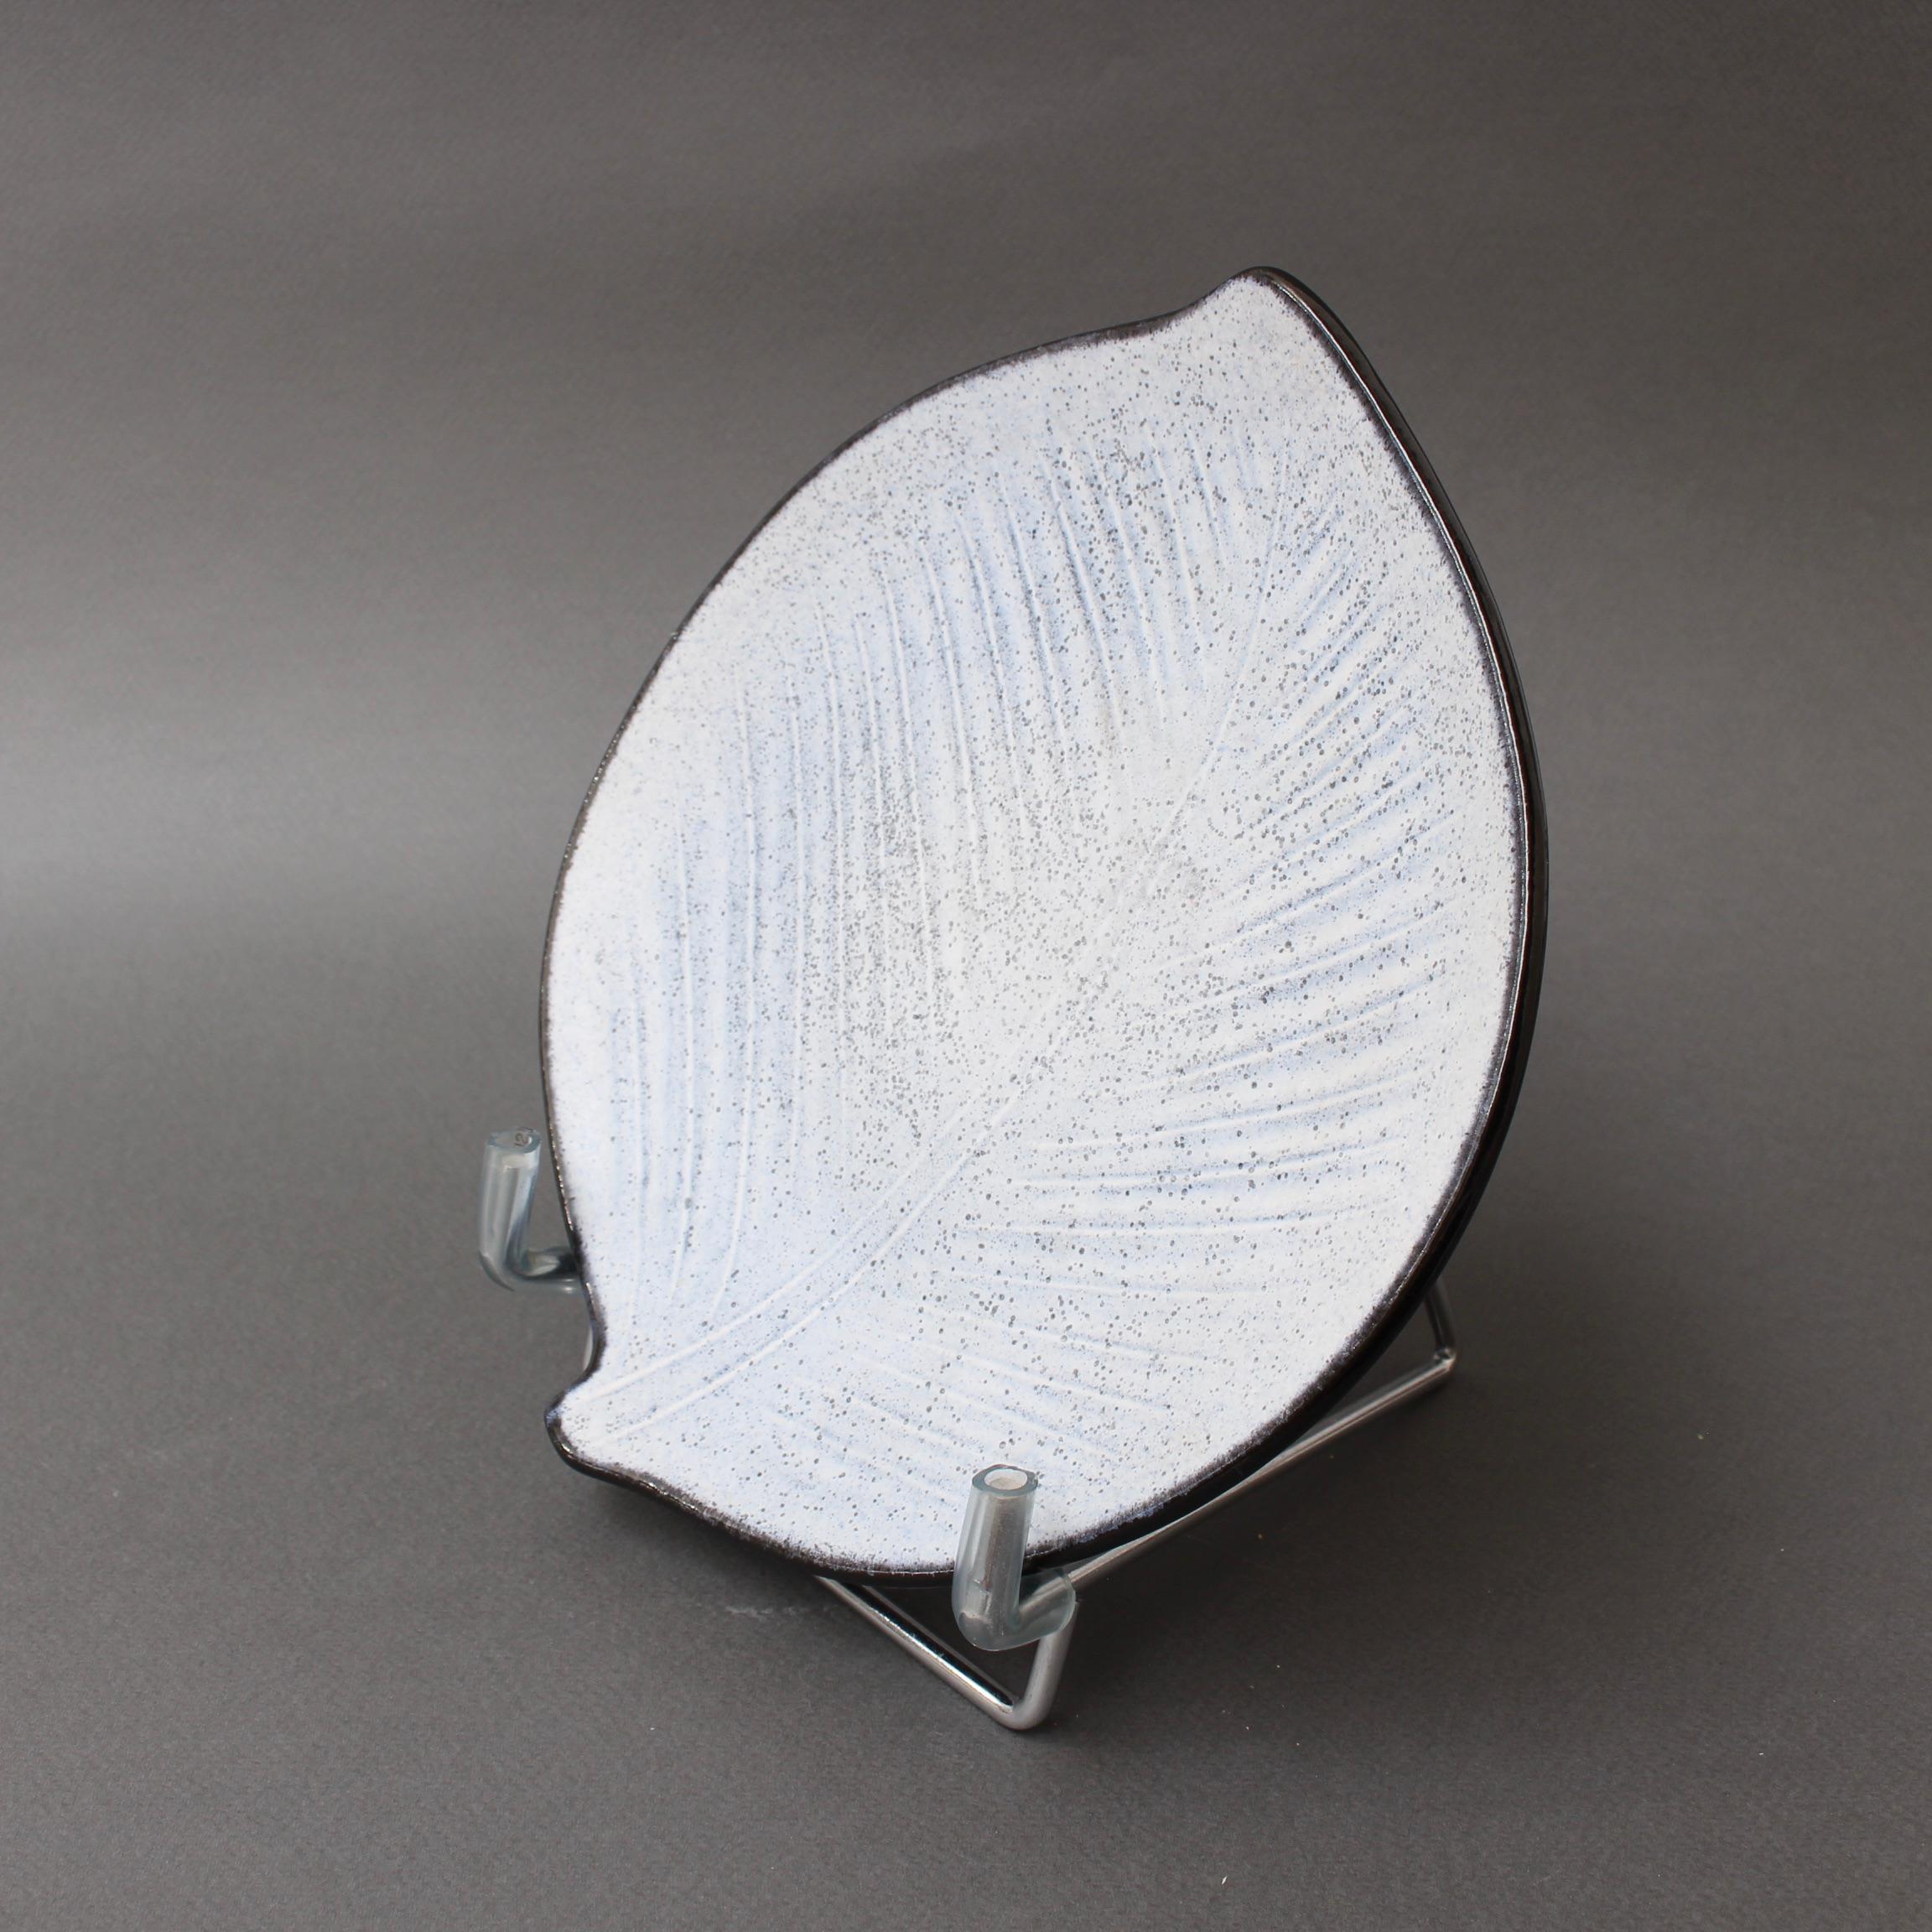 Mid-Century Modern Midcentury French Leaf-Shaped Dish / Vide-Poche by Marcel Guillot, circa 1960s